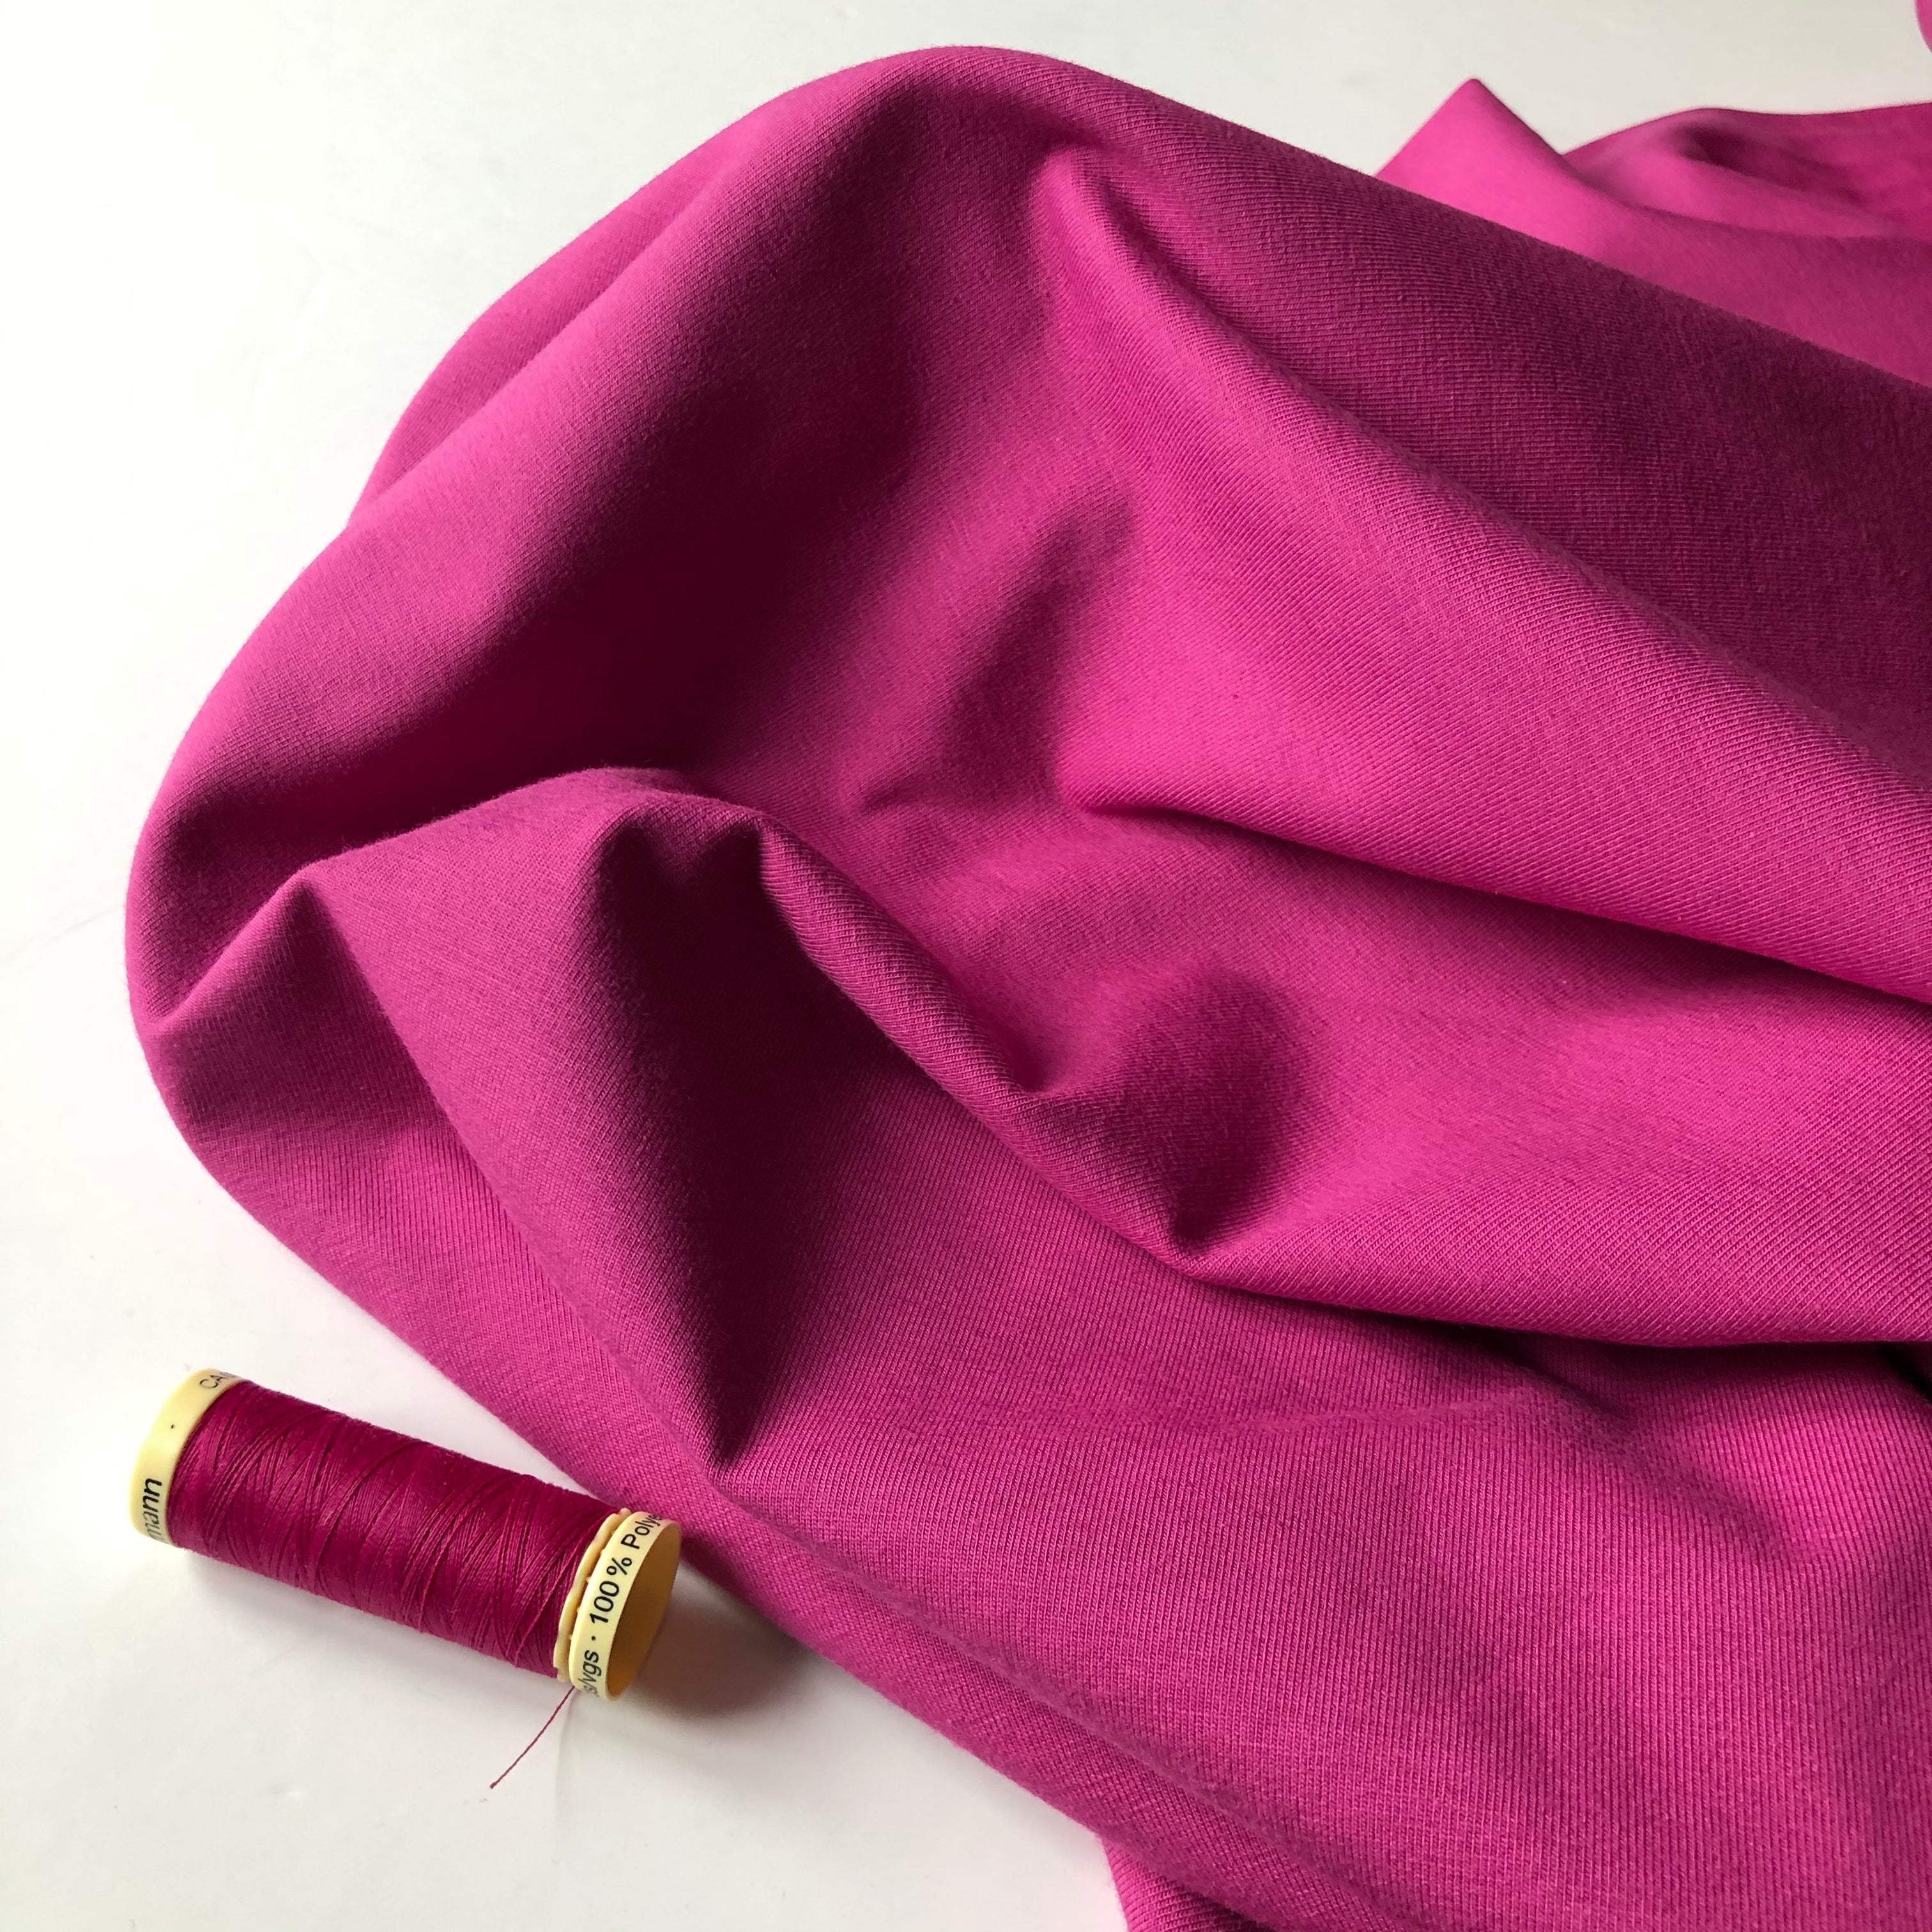 REMNANT 0.58 Metre - Essential Chic Soft Magenta Cotton Jersey Fabric